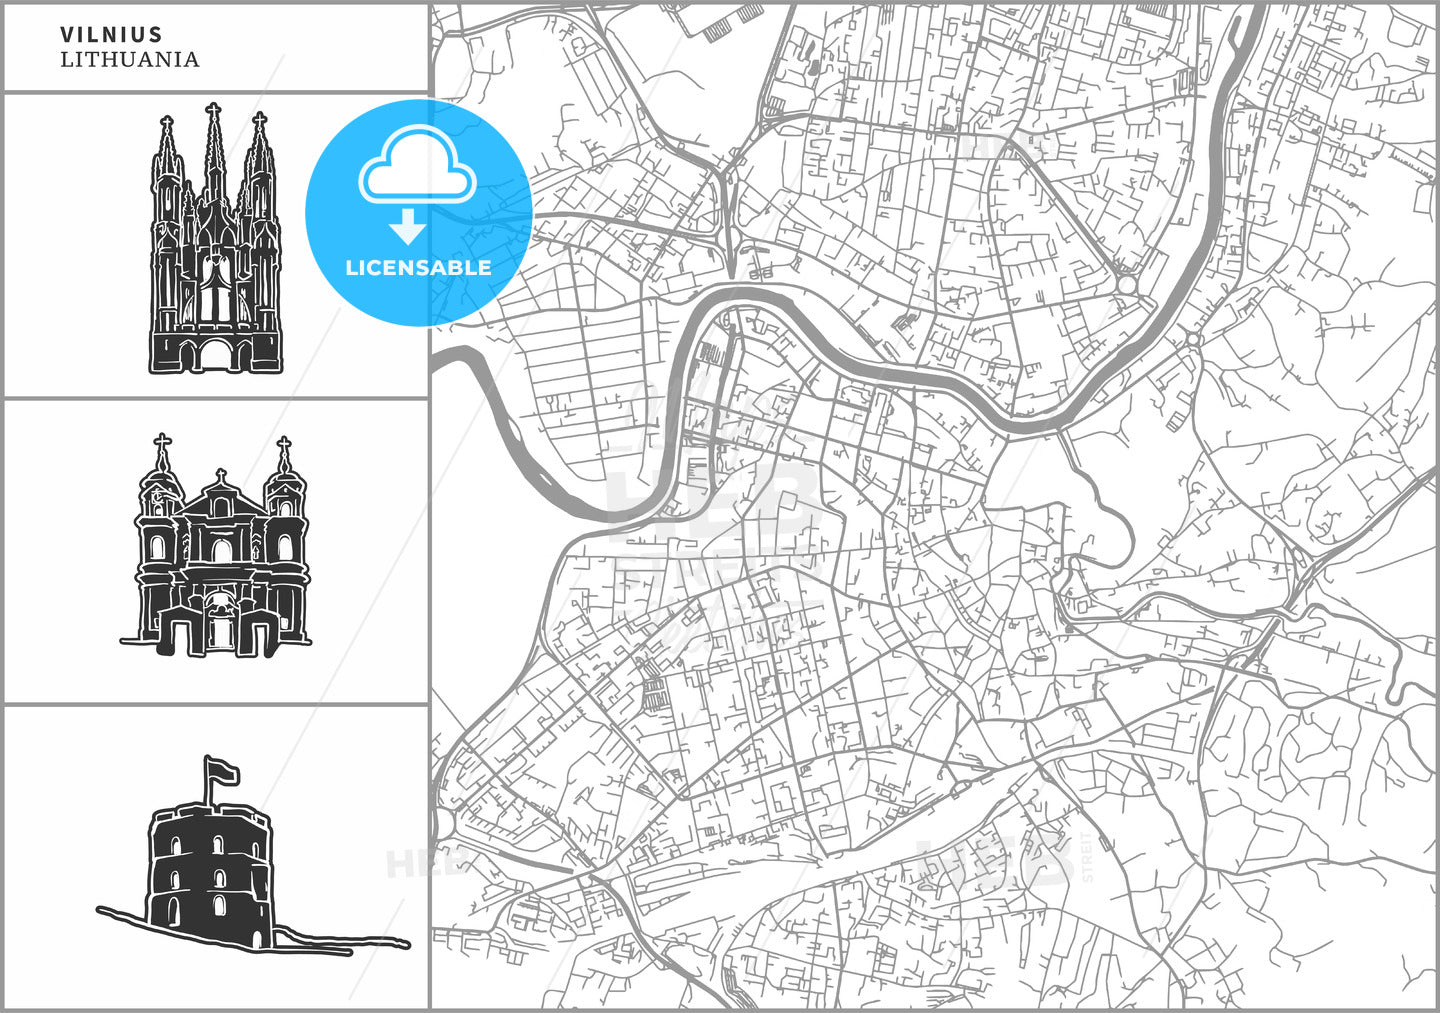 Vilnius city map with hand-drawn architecture icons